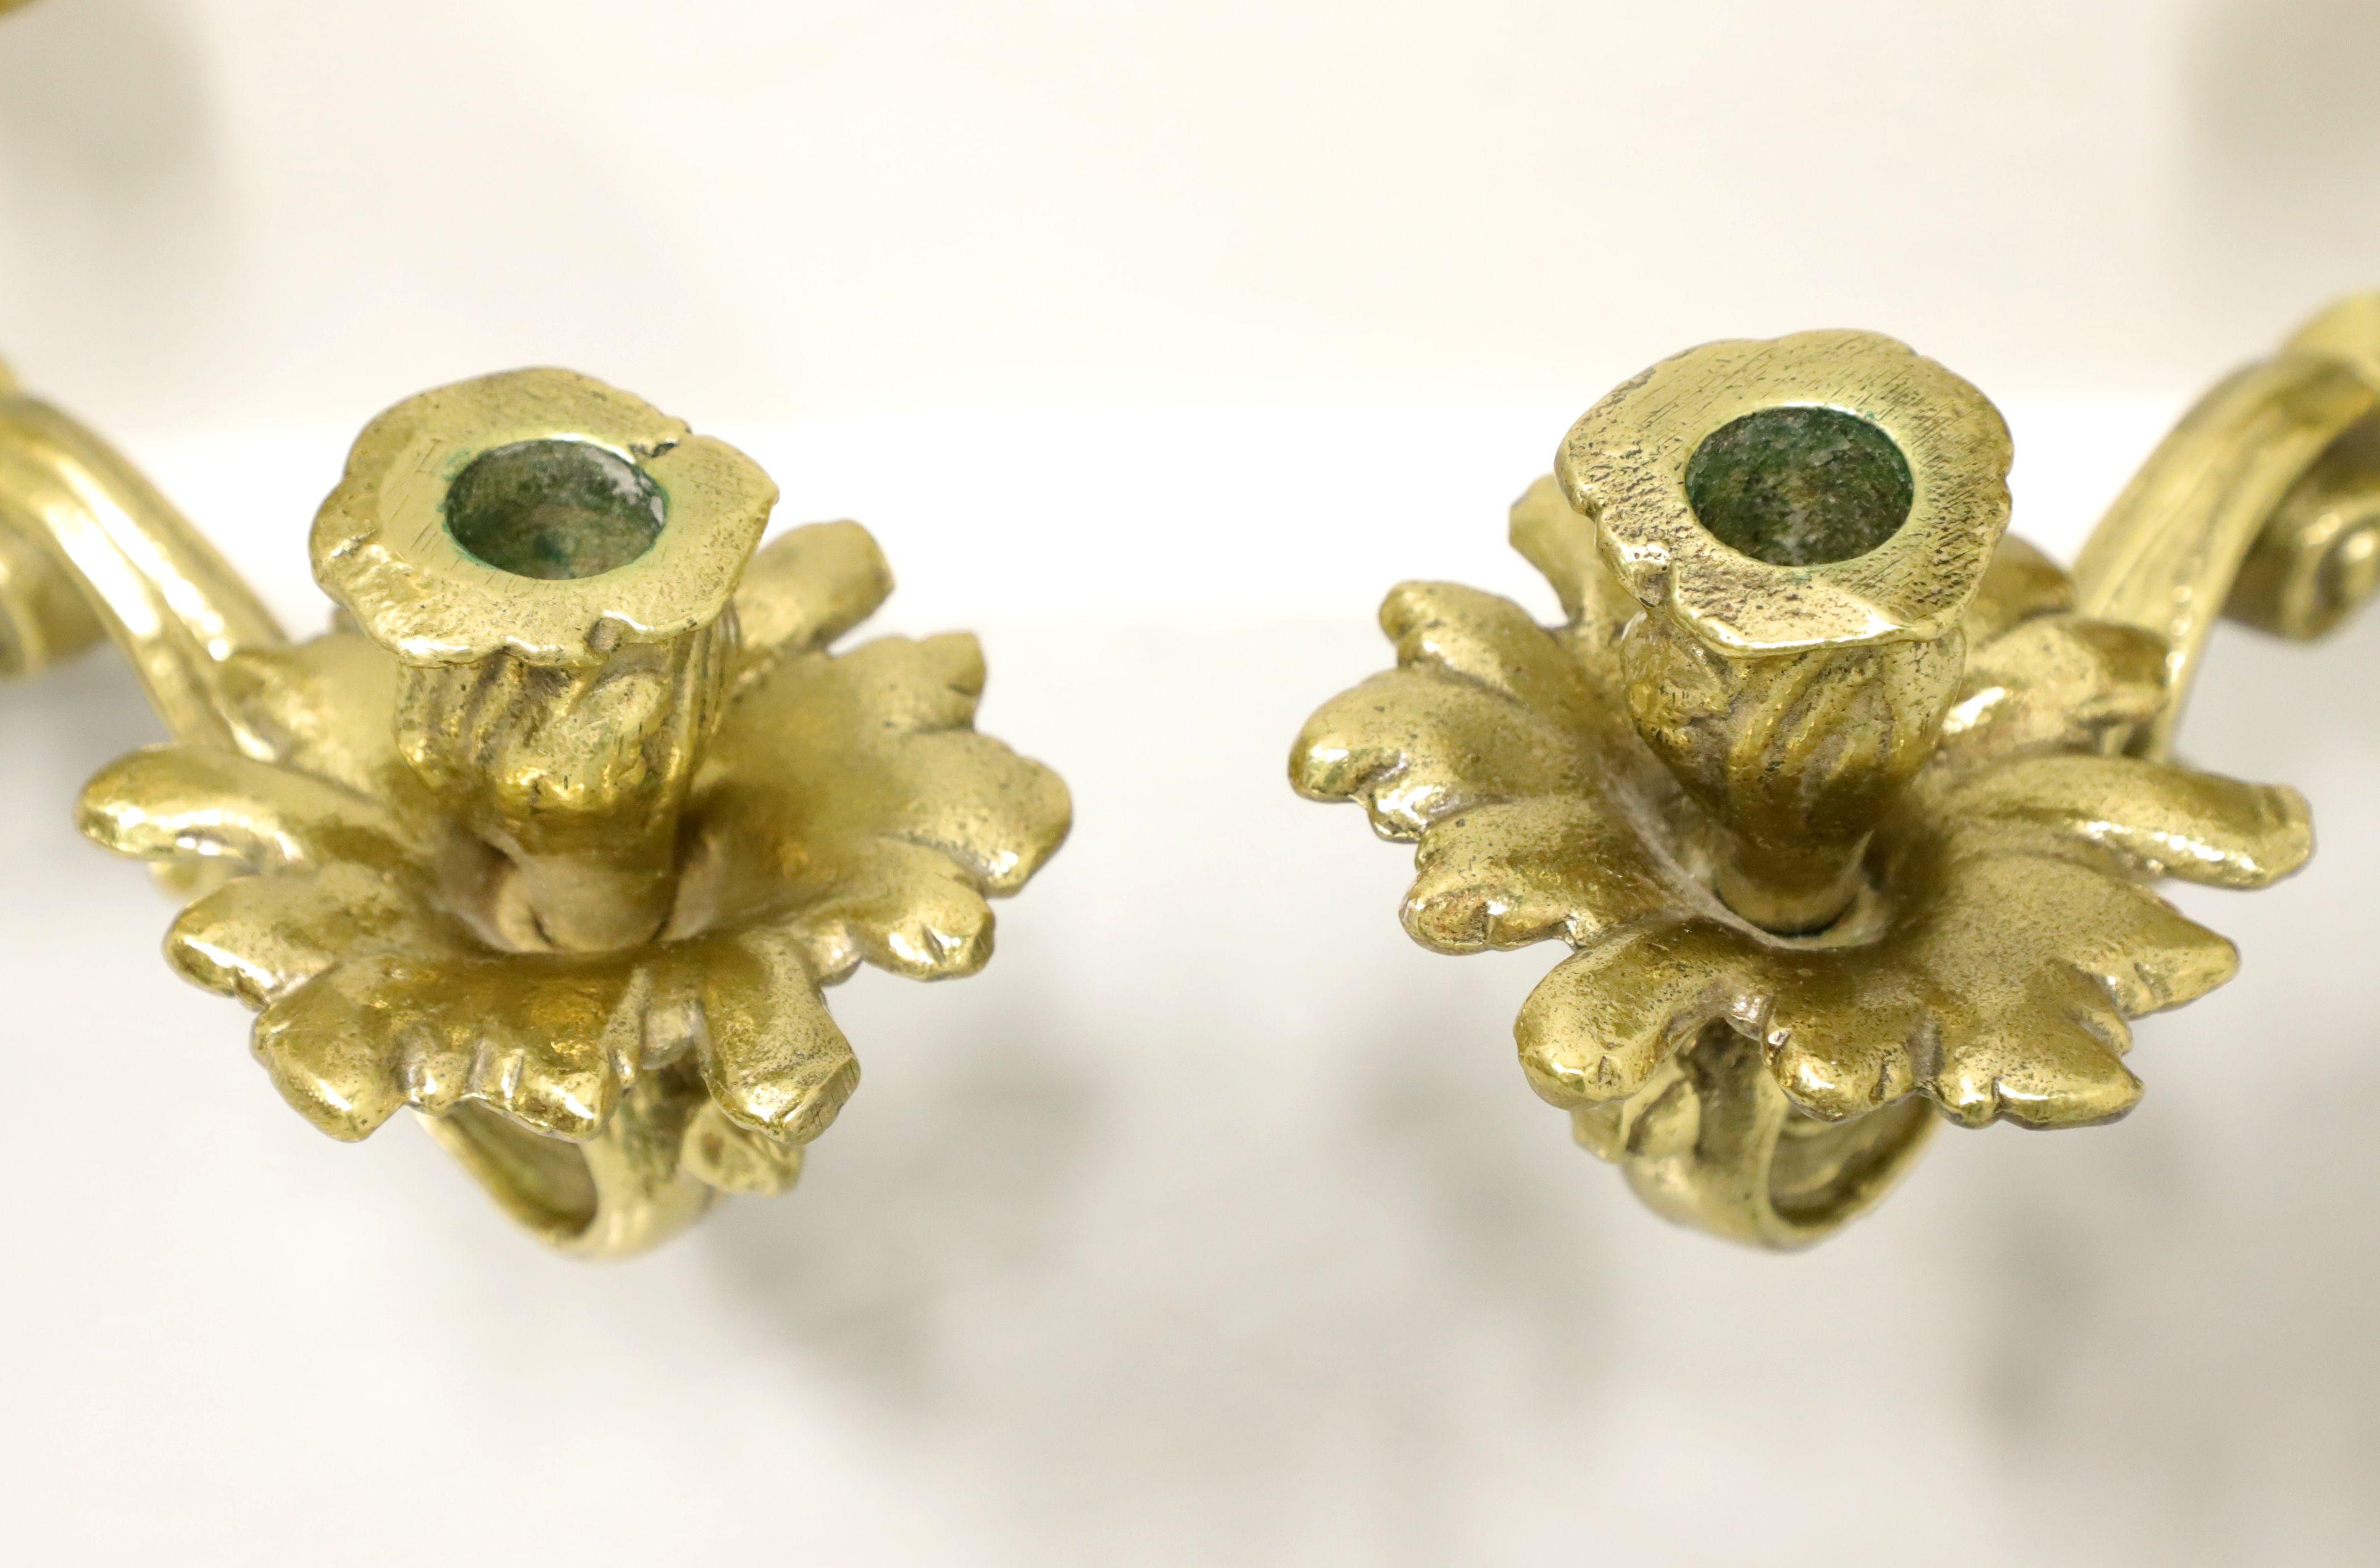 Antique 1920's Solid Brass Rococo Style Candle Wall Sconces - Pair For Sale 2